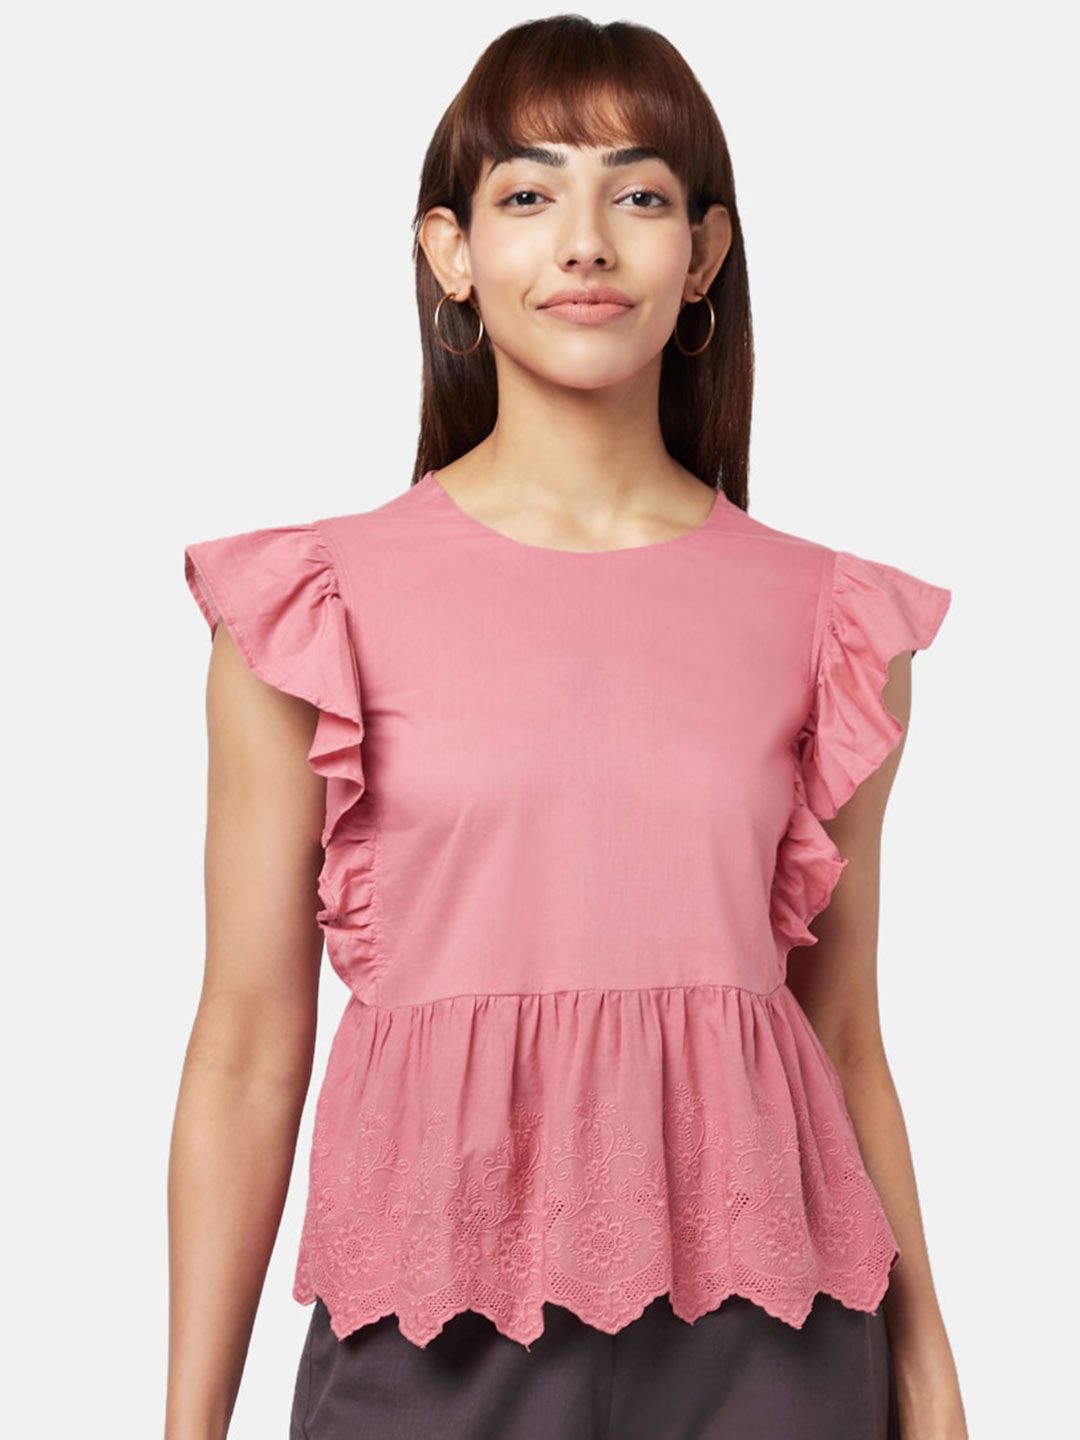 AKKRITI BY PANTALOONS Pink Peplum Top Price in India, Full Specifications &  Offers